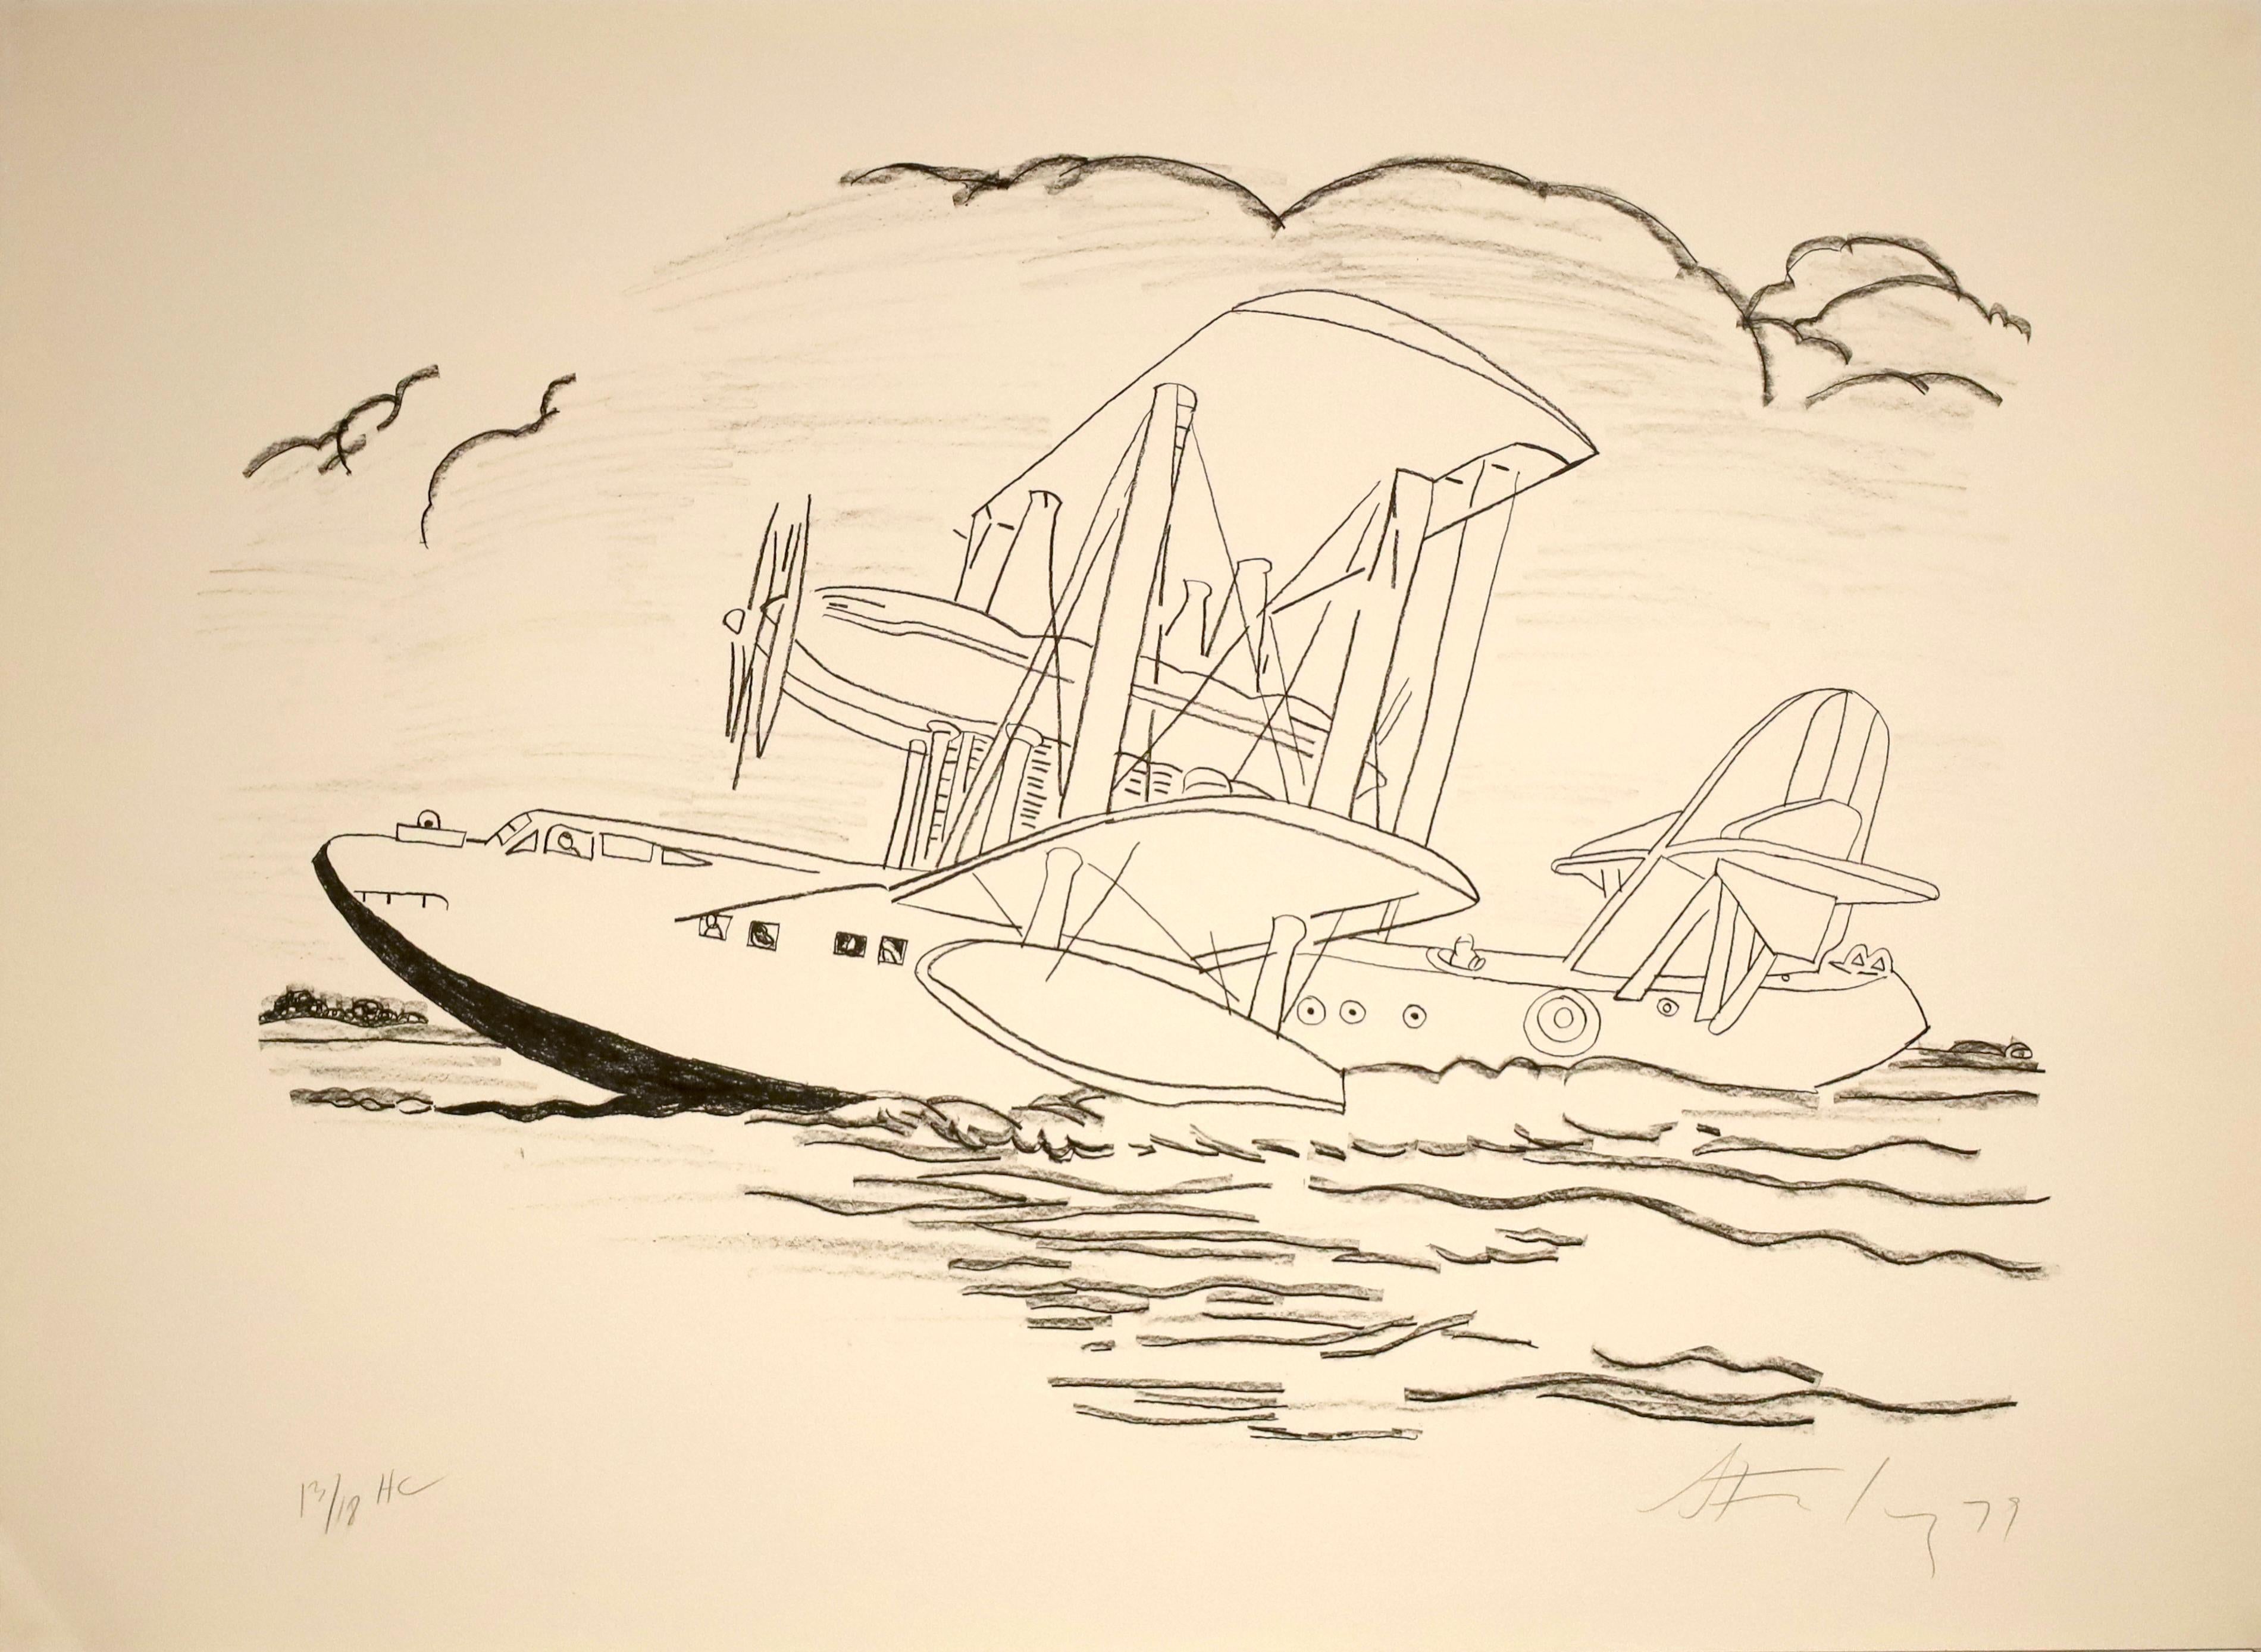 Robert Bob Stanley Print - "A VERY LARGE FLYING BOAT TAKING OFF"